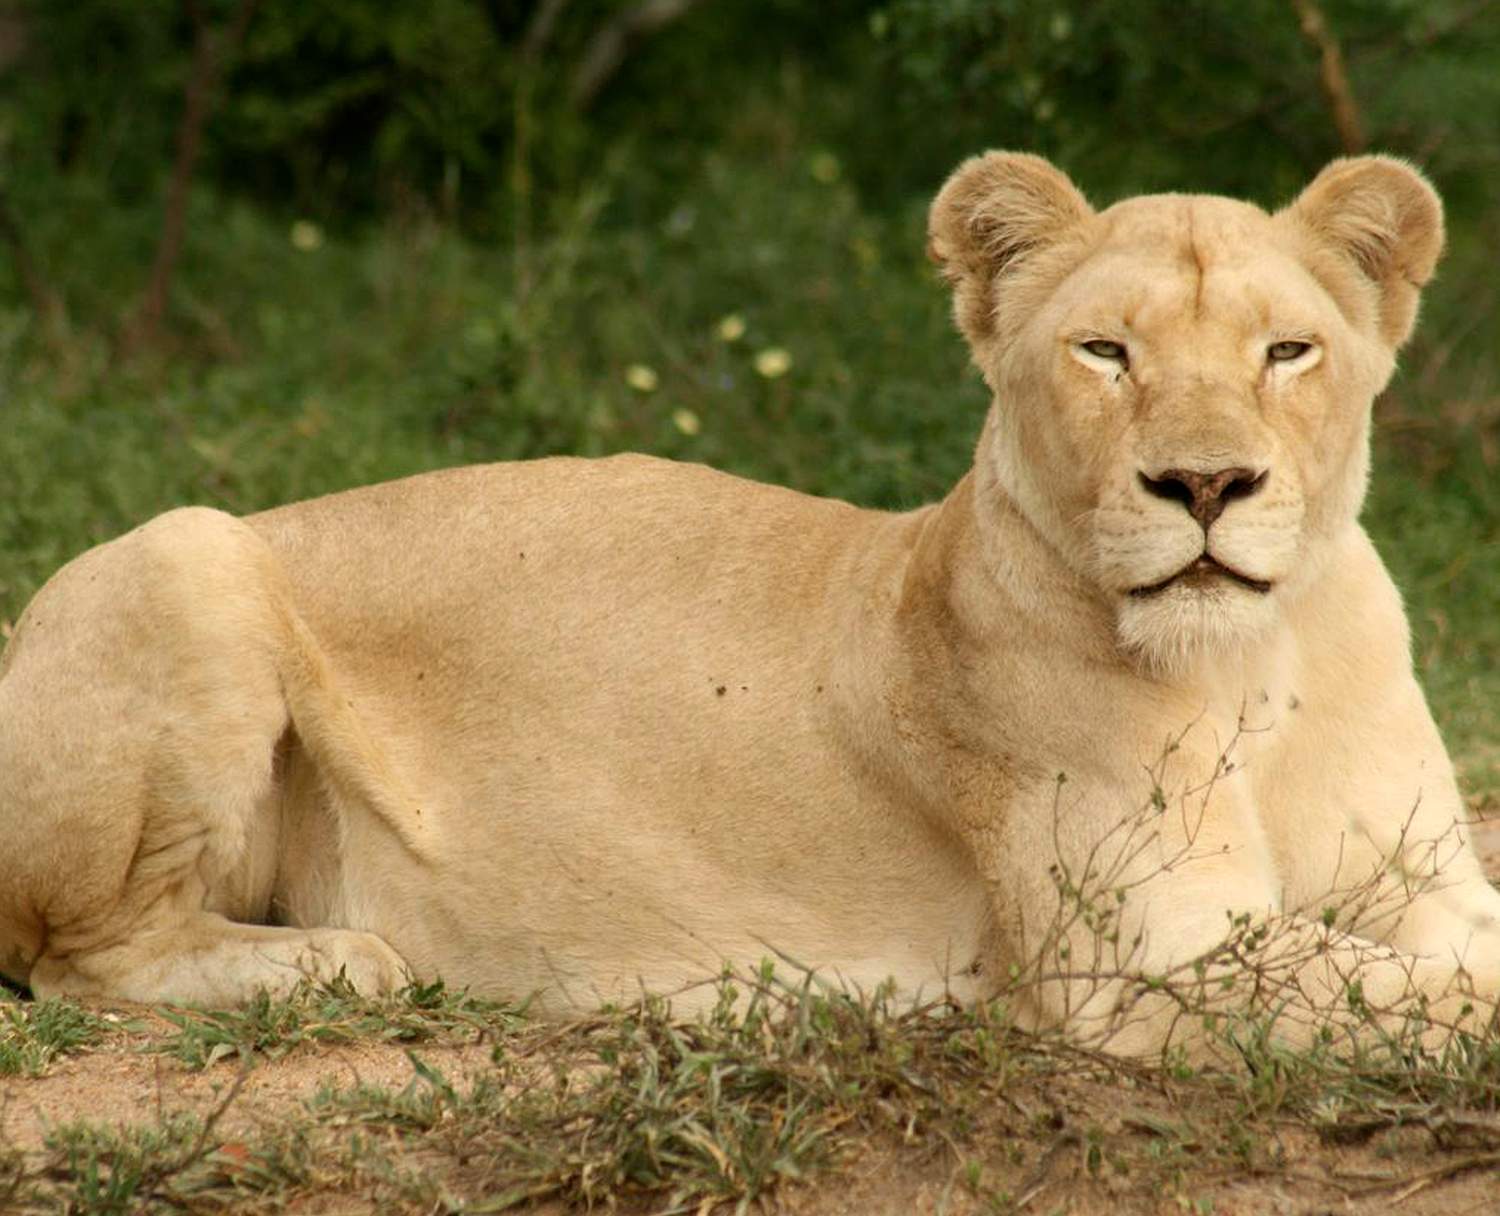 White Lioness lying down and looking at the camera